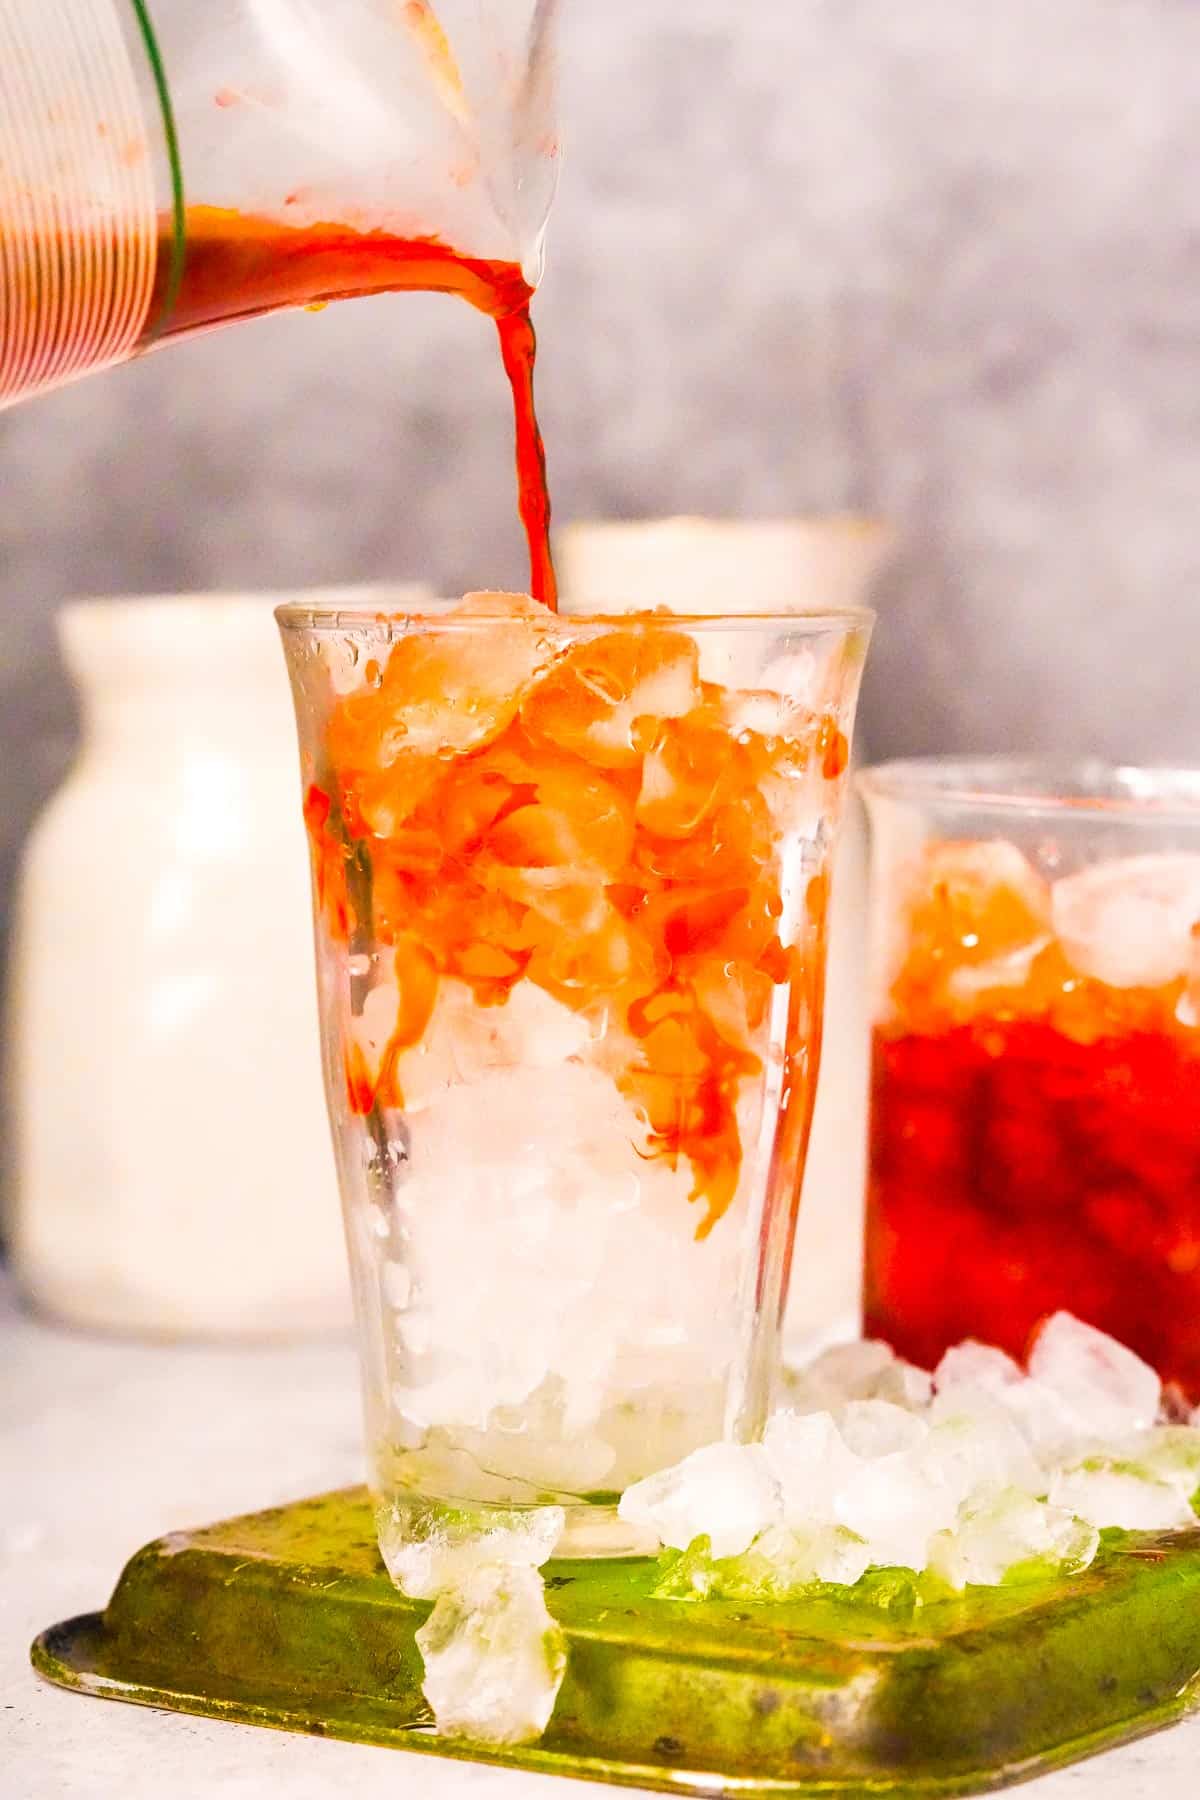 A glass pitcher of Thai iced tea being poured into a glass.